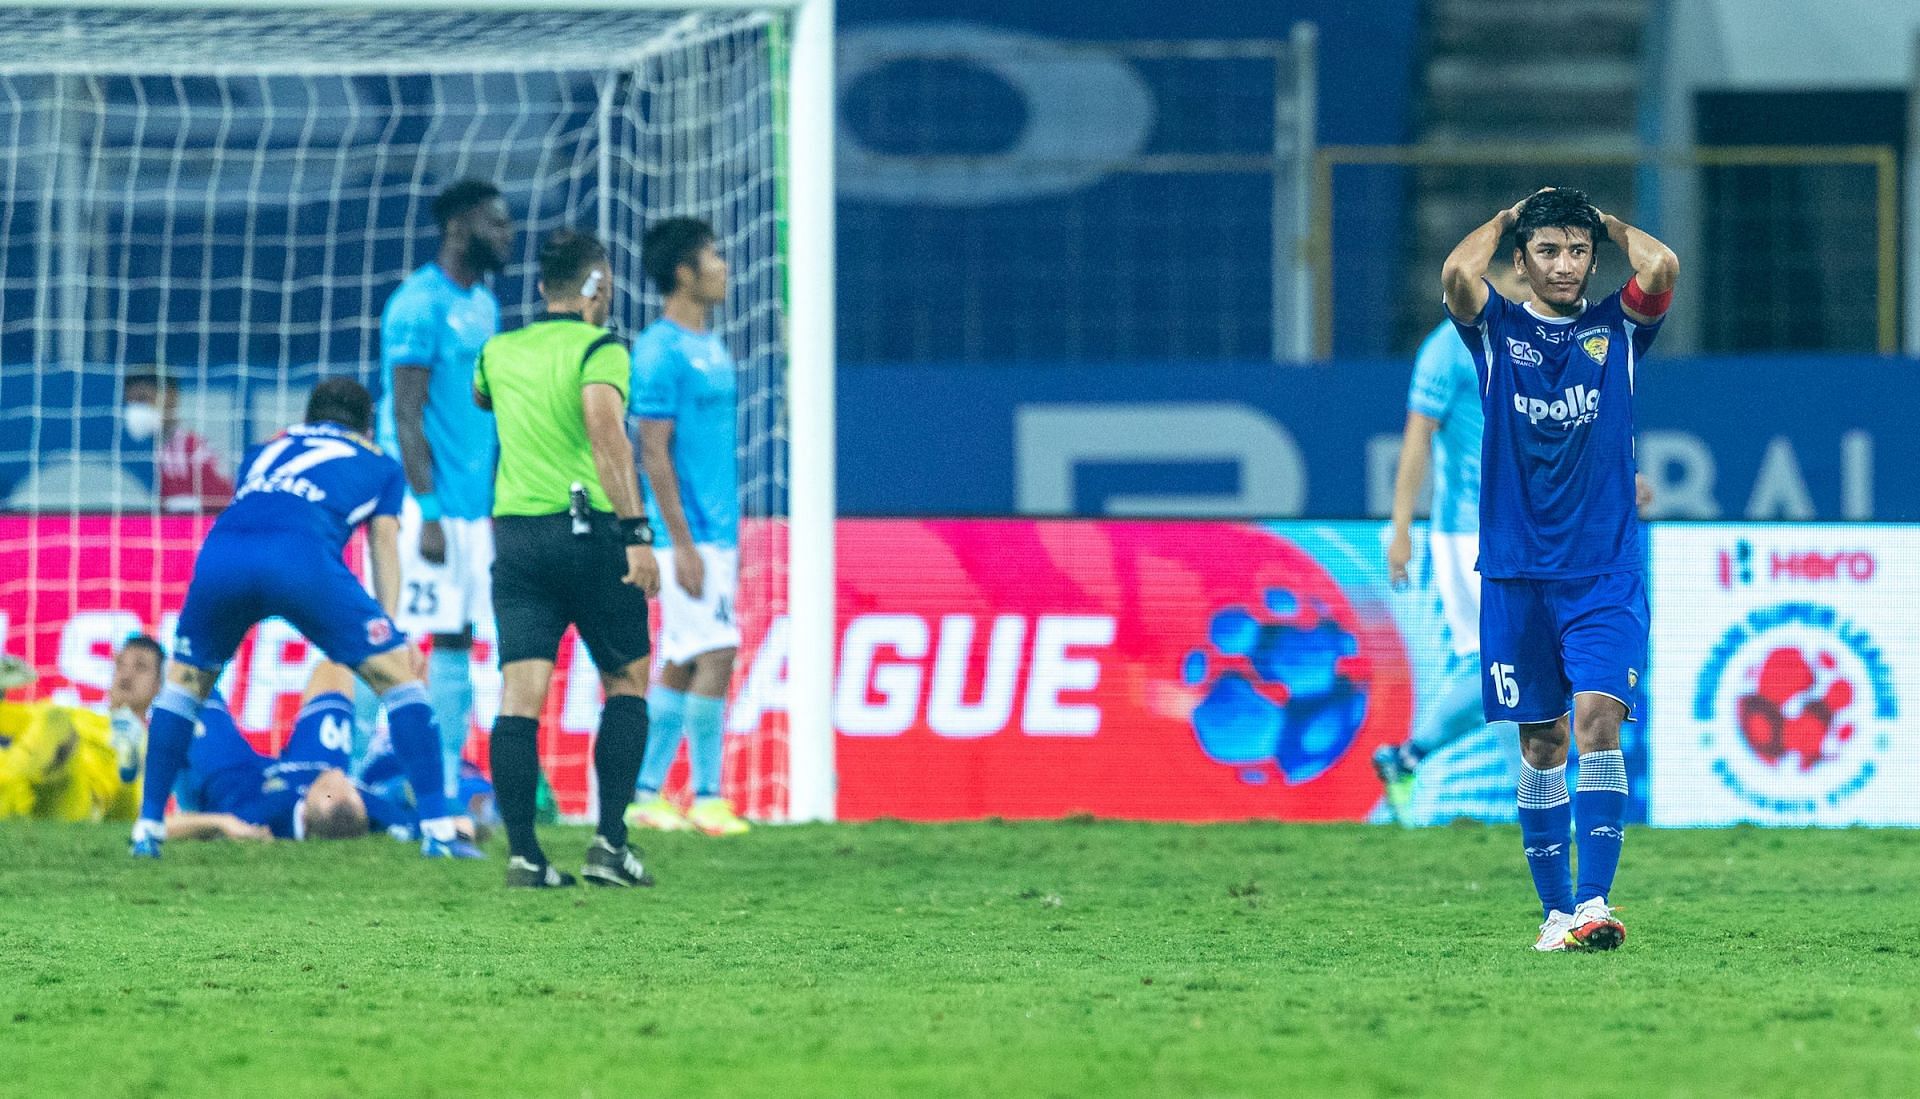 Heartbreak for the Chennaiyin FC players and captain Anirudh Thapa after a tough game against Mumbai City FC. (Image Courtesy: ISL Media)